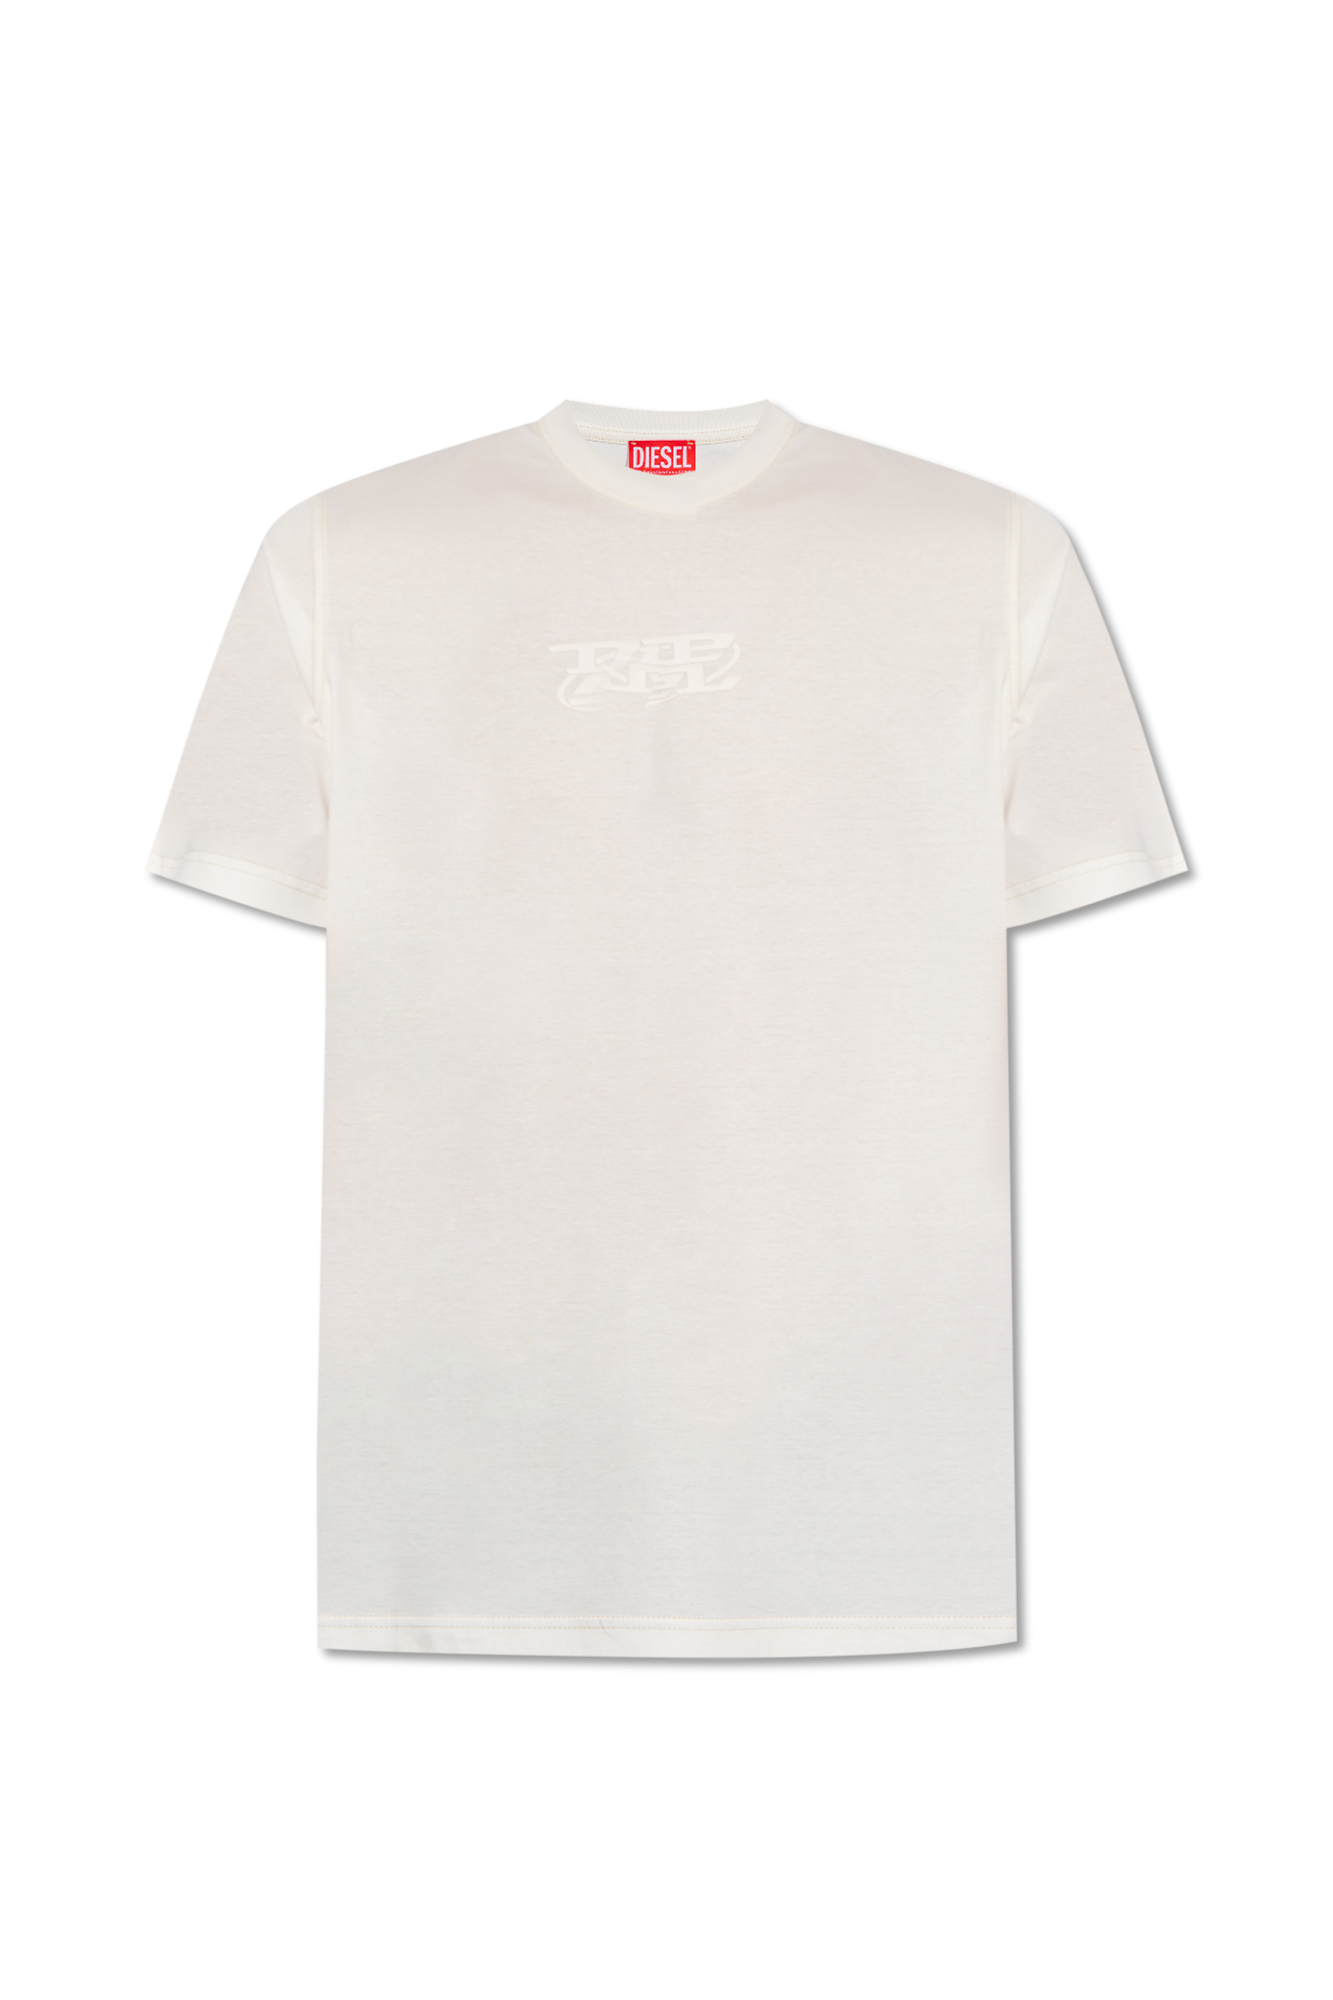 Diesel ‘T-MUST’ T-shirt with logo